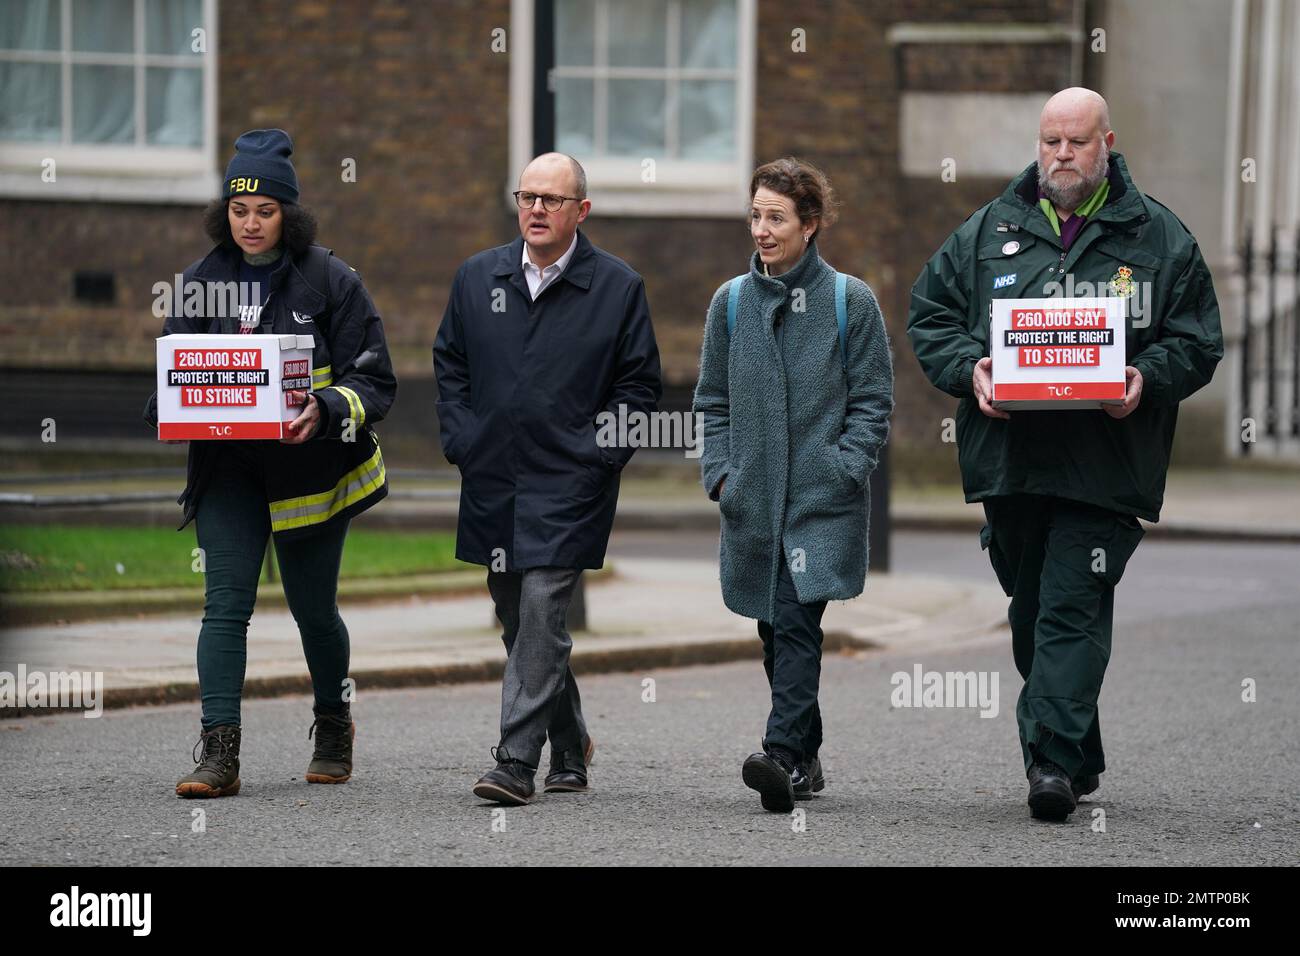 Paul Nowak, general secretary of the Trades Union Congress (TUC), is joined by a representative of the Fire Brigades Union and the NHS Ambulance Service as they walk to 10 Downing Street, London, to hand in a mass petition against the Government's controversial plans for a new law on minimum service levels during strikes. Picture date: Wednesday February 1, 2023. Stock Photo